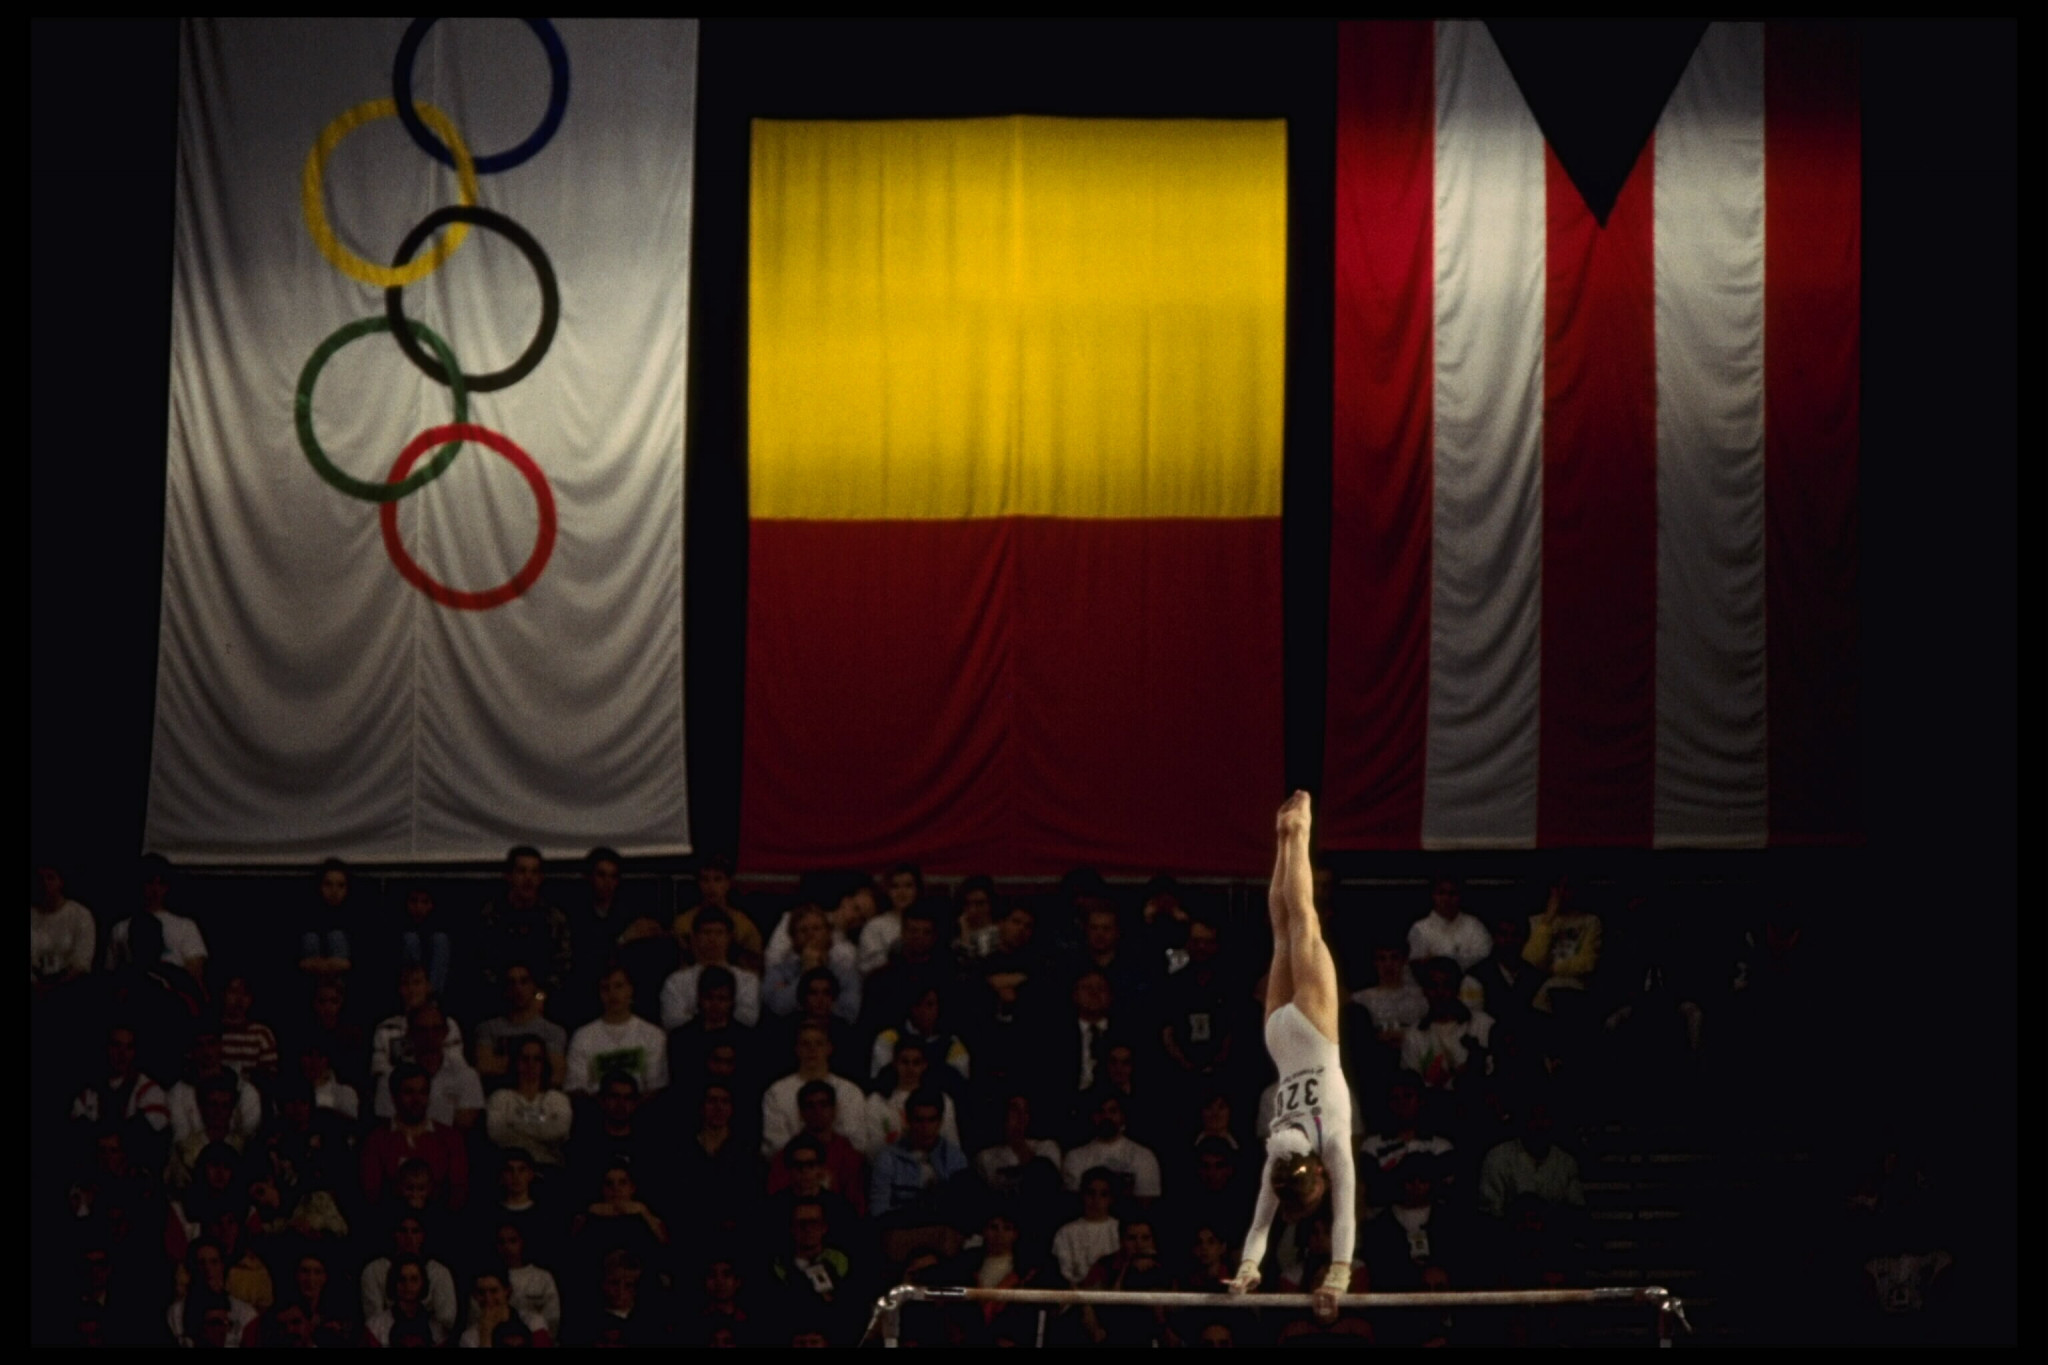 Birmingham hosted the World Artistic Gymnastics Championships in 1993 ©Getty Images